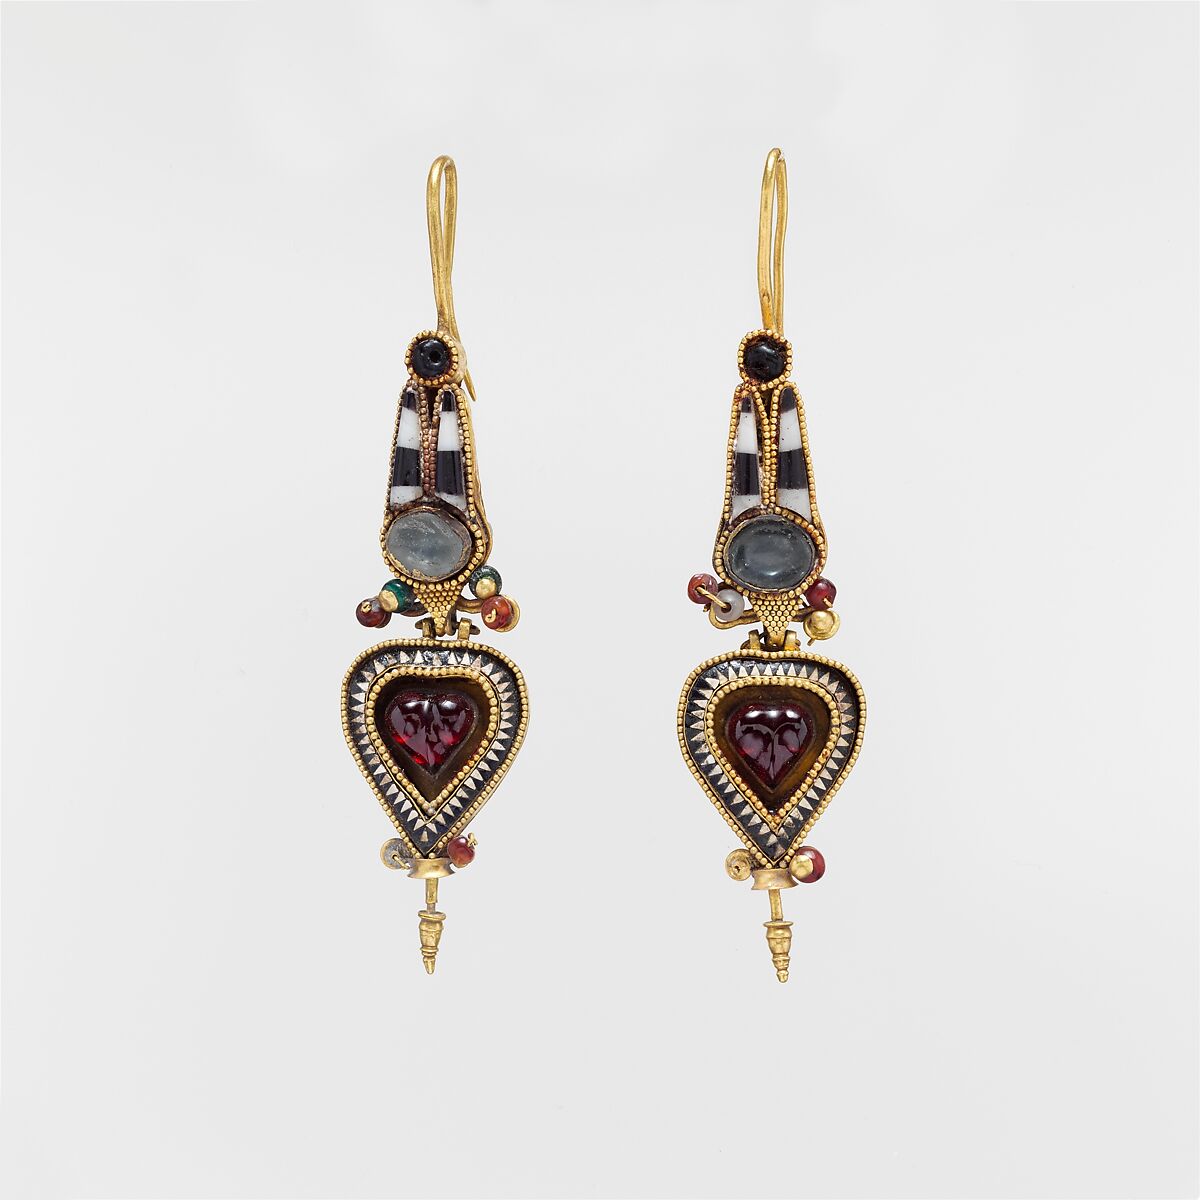 Pair of gold earrings with an Egyptian Atef crown set with stones and glass, Gold with stone and glass, Greek 